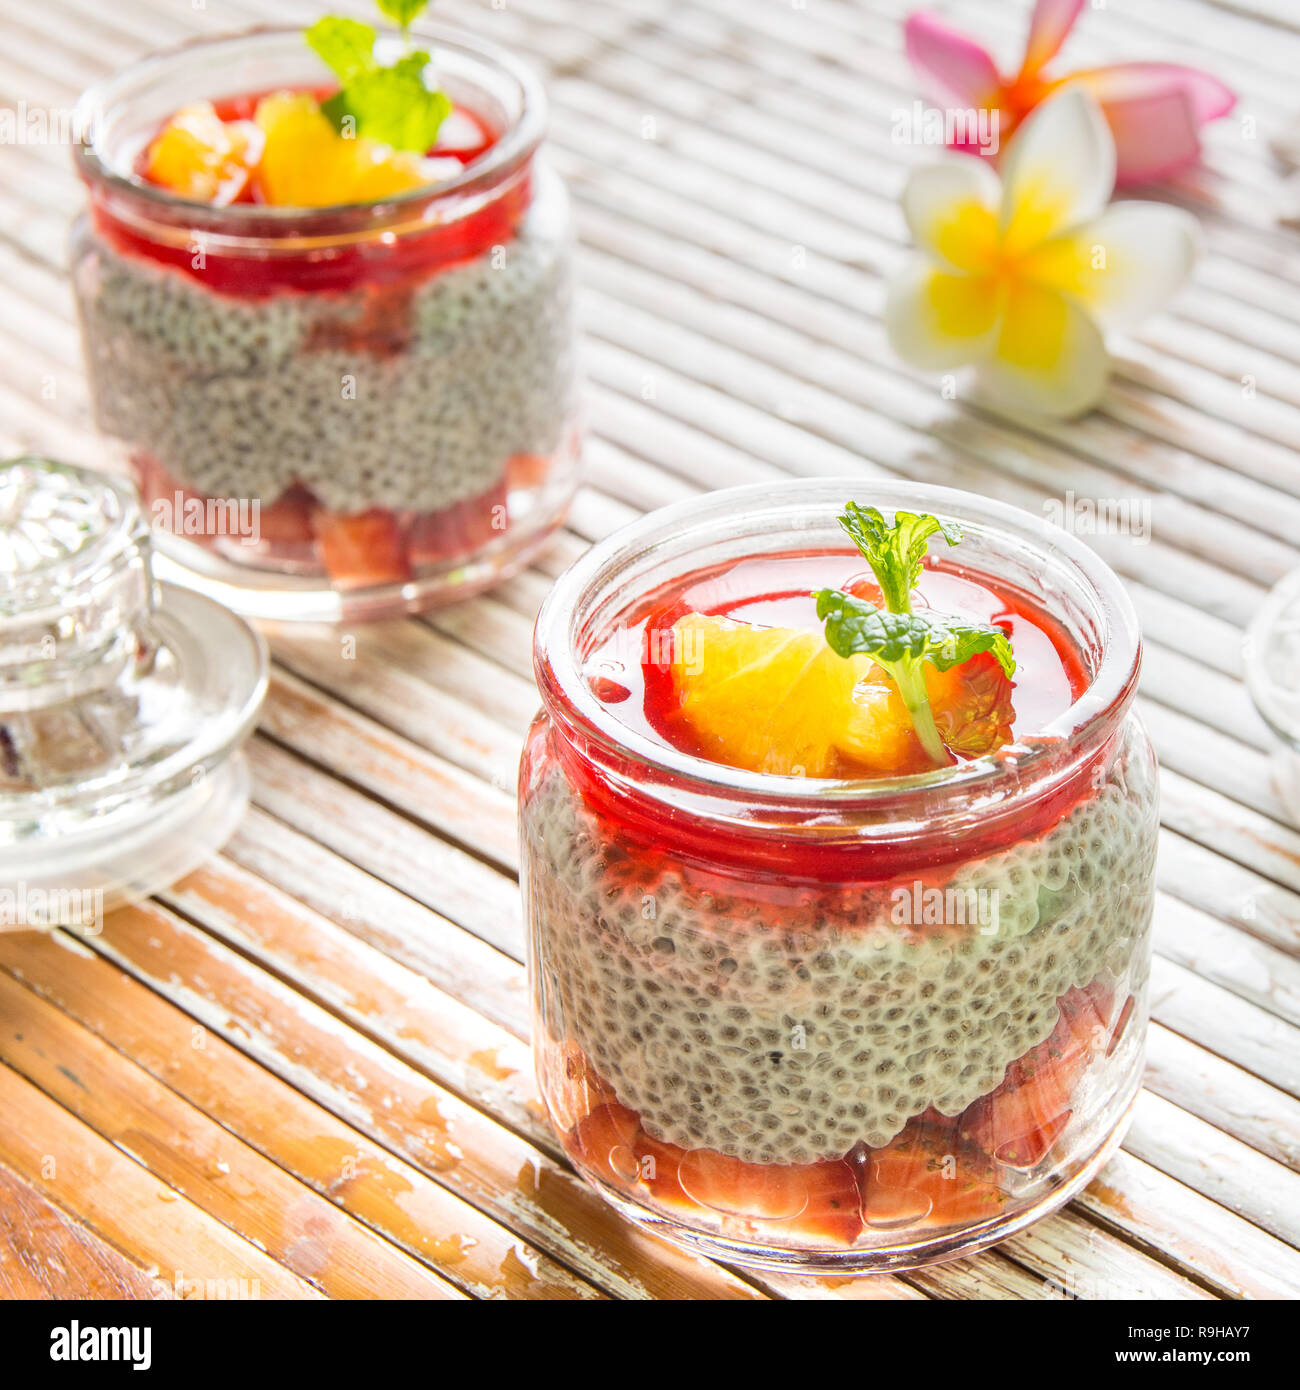 Chia seed and strawberry dessert in glass jar placed on table Stock Photo